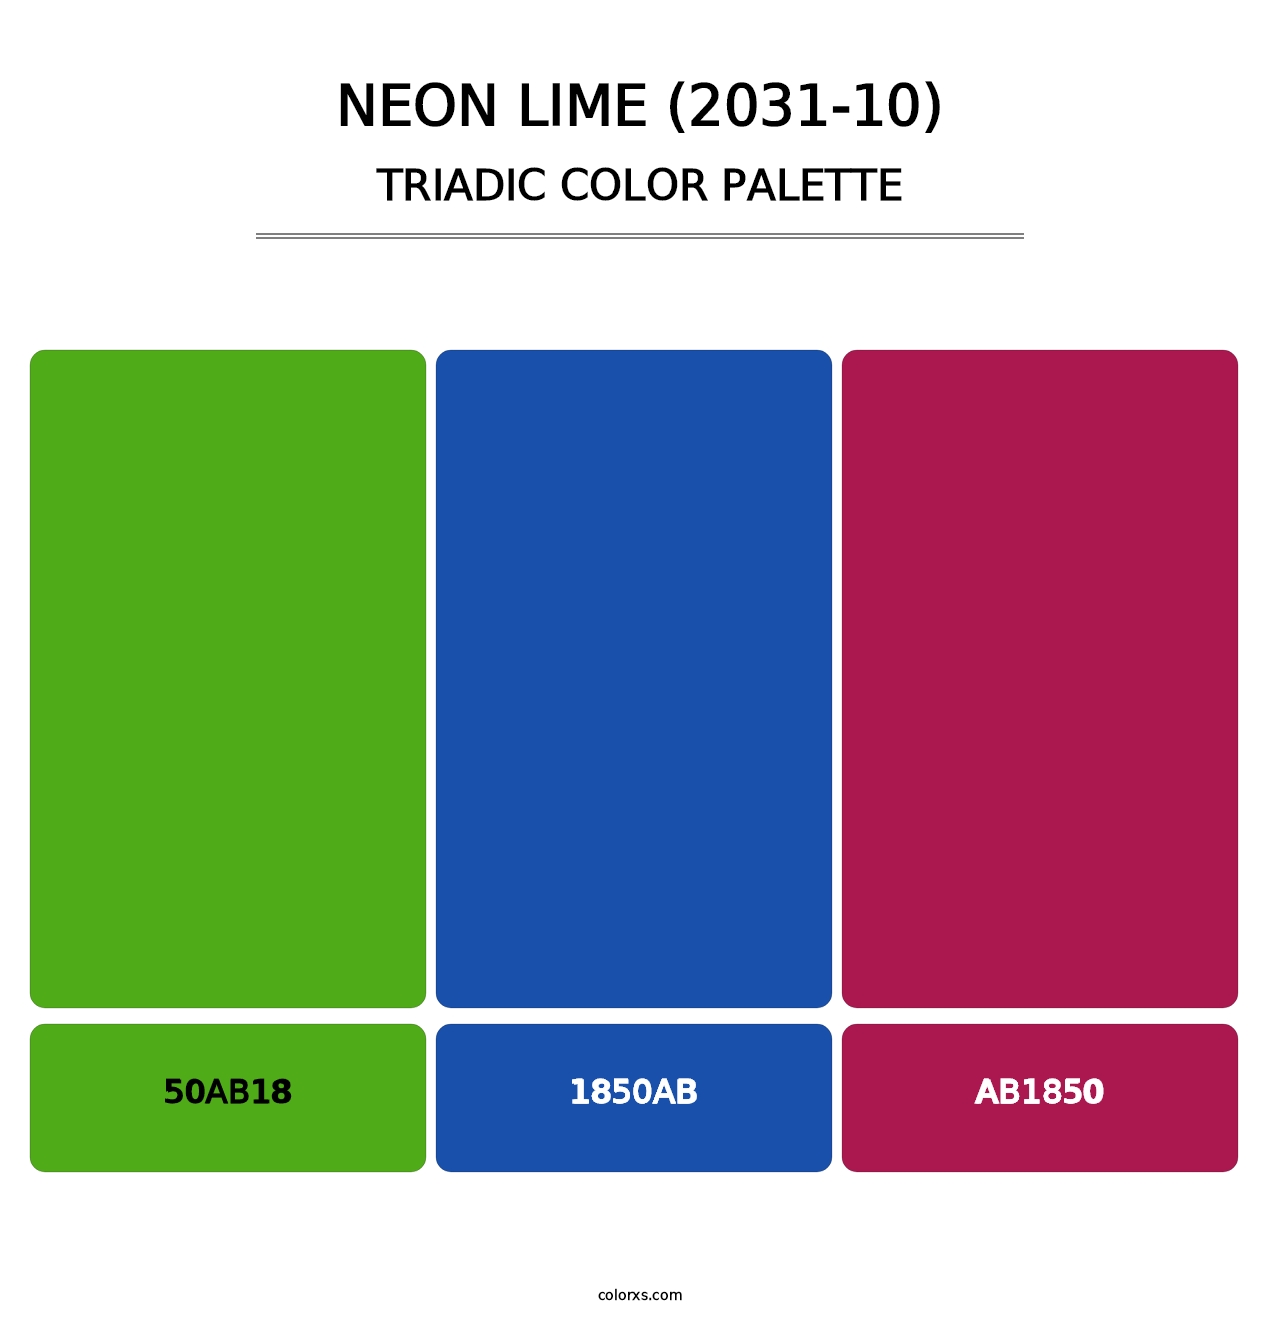 Neon Lime (2031-10) - Triadic Color Palette